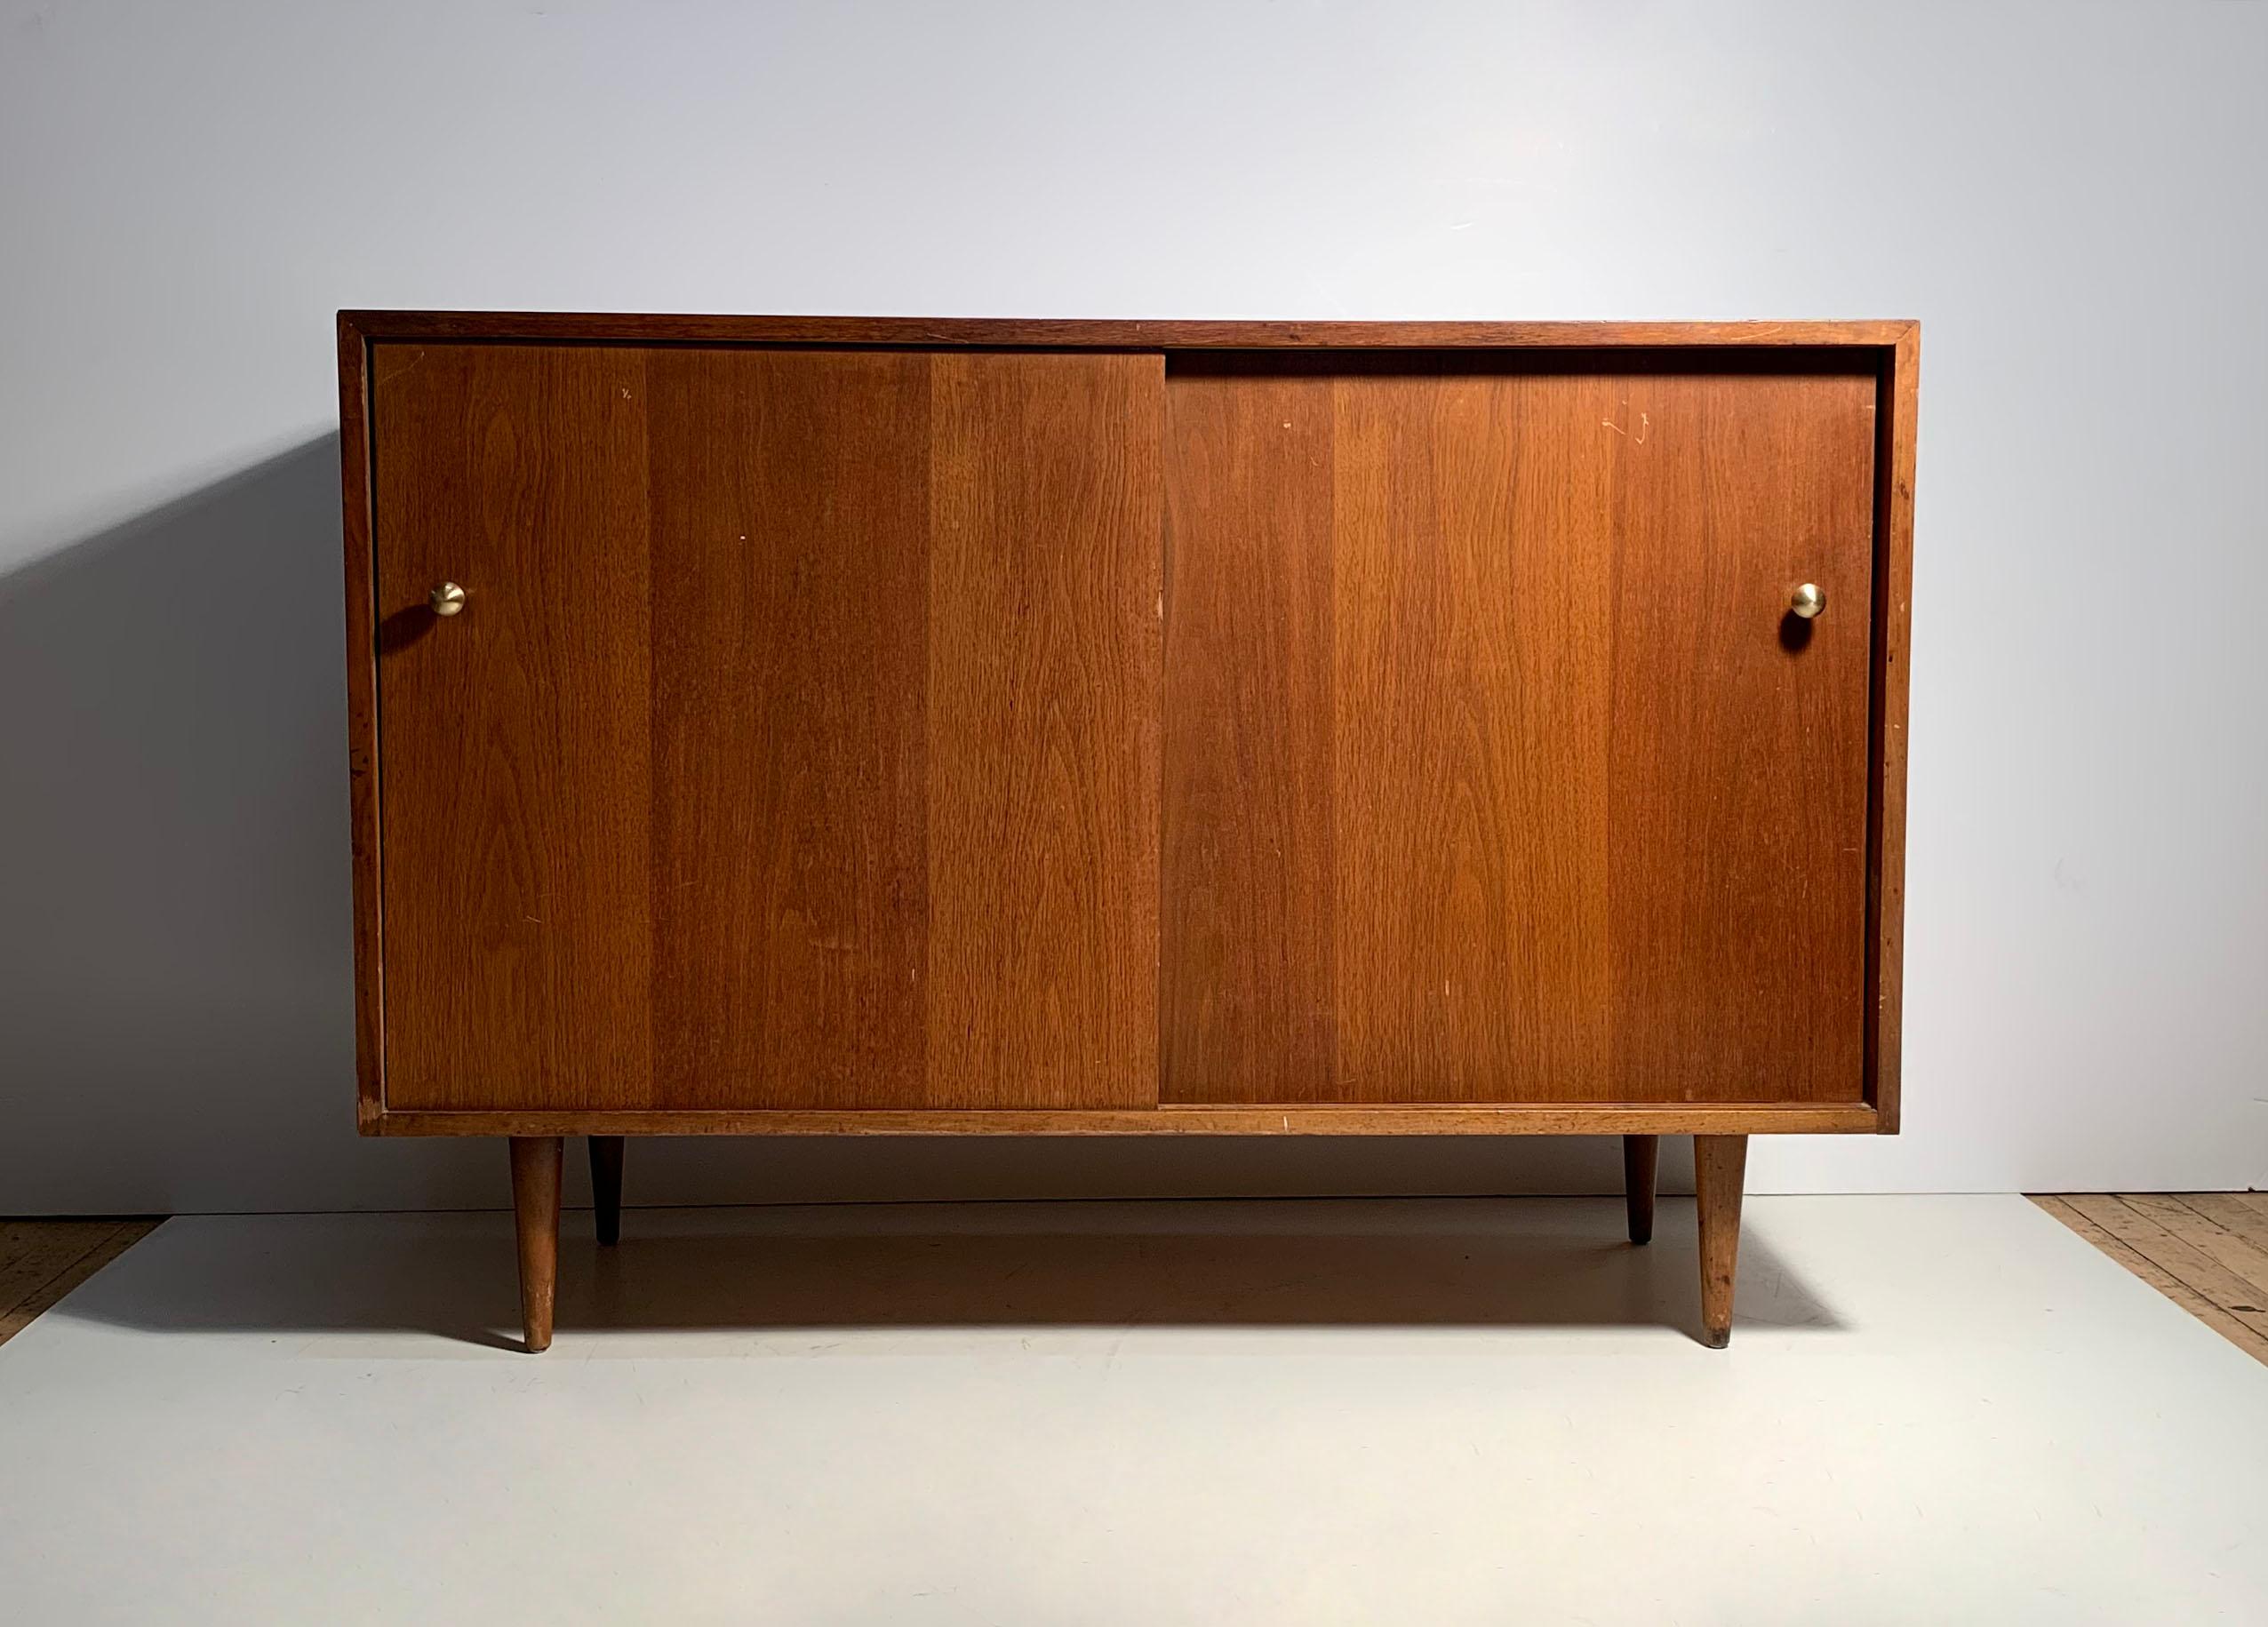 Glenn of California sideboard cabinet designed attributed to Milo Baughman.

Item needs refinishing. Pulls have been replaced with new nice quality brass pulls as shown.